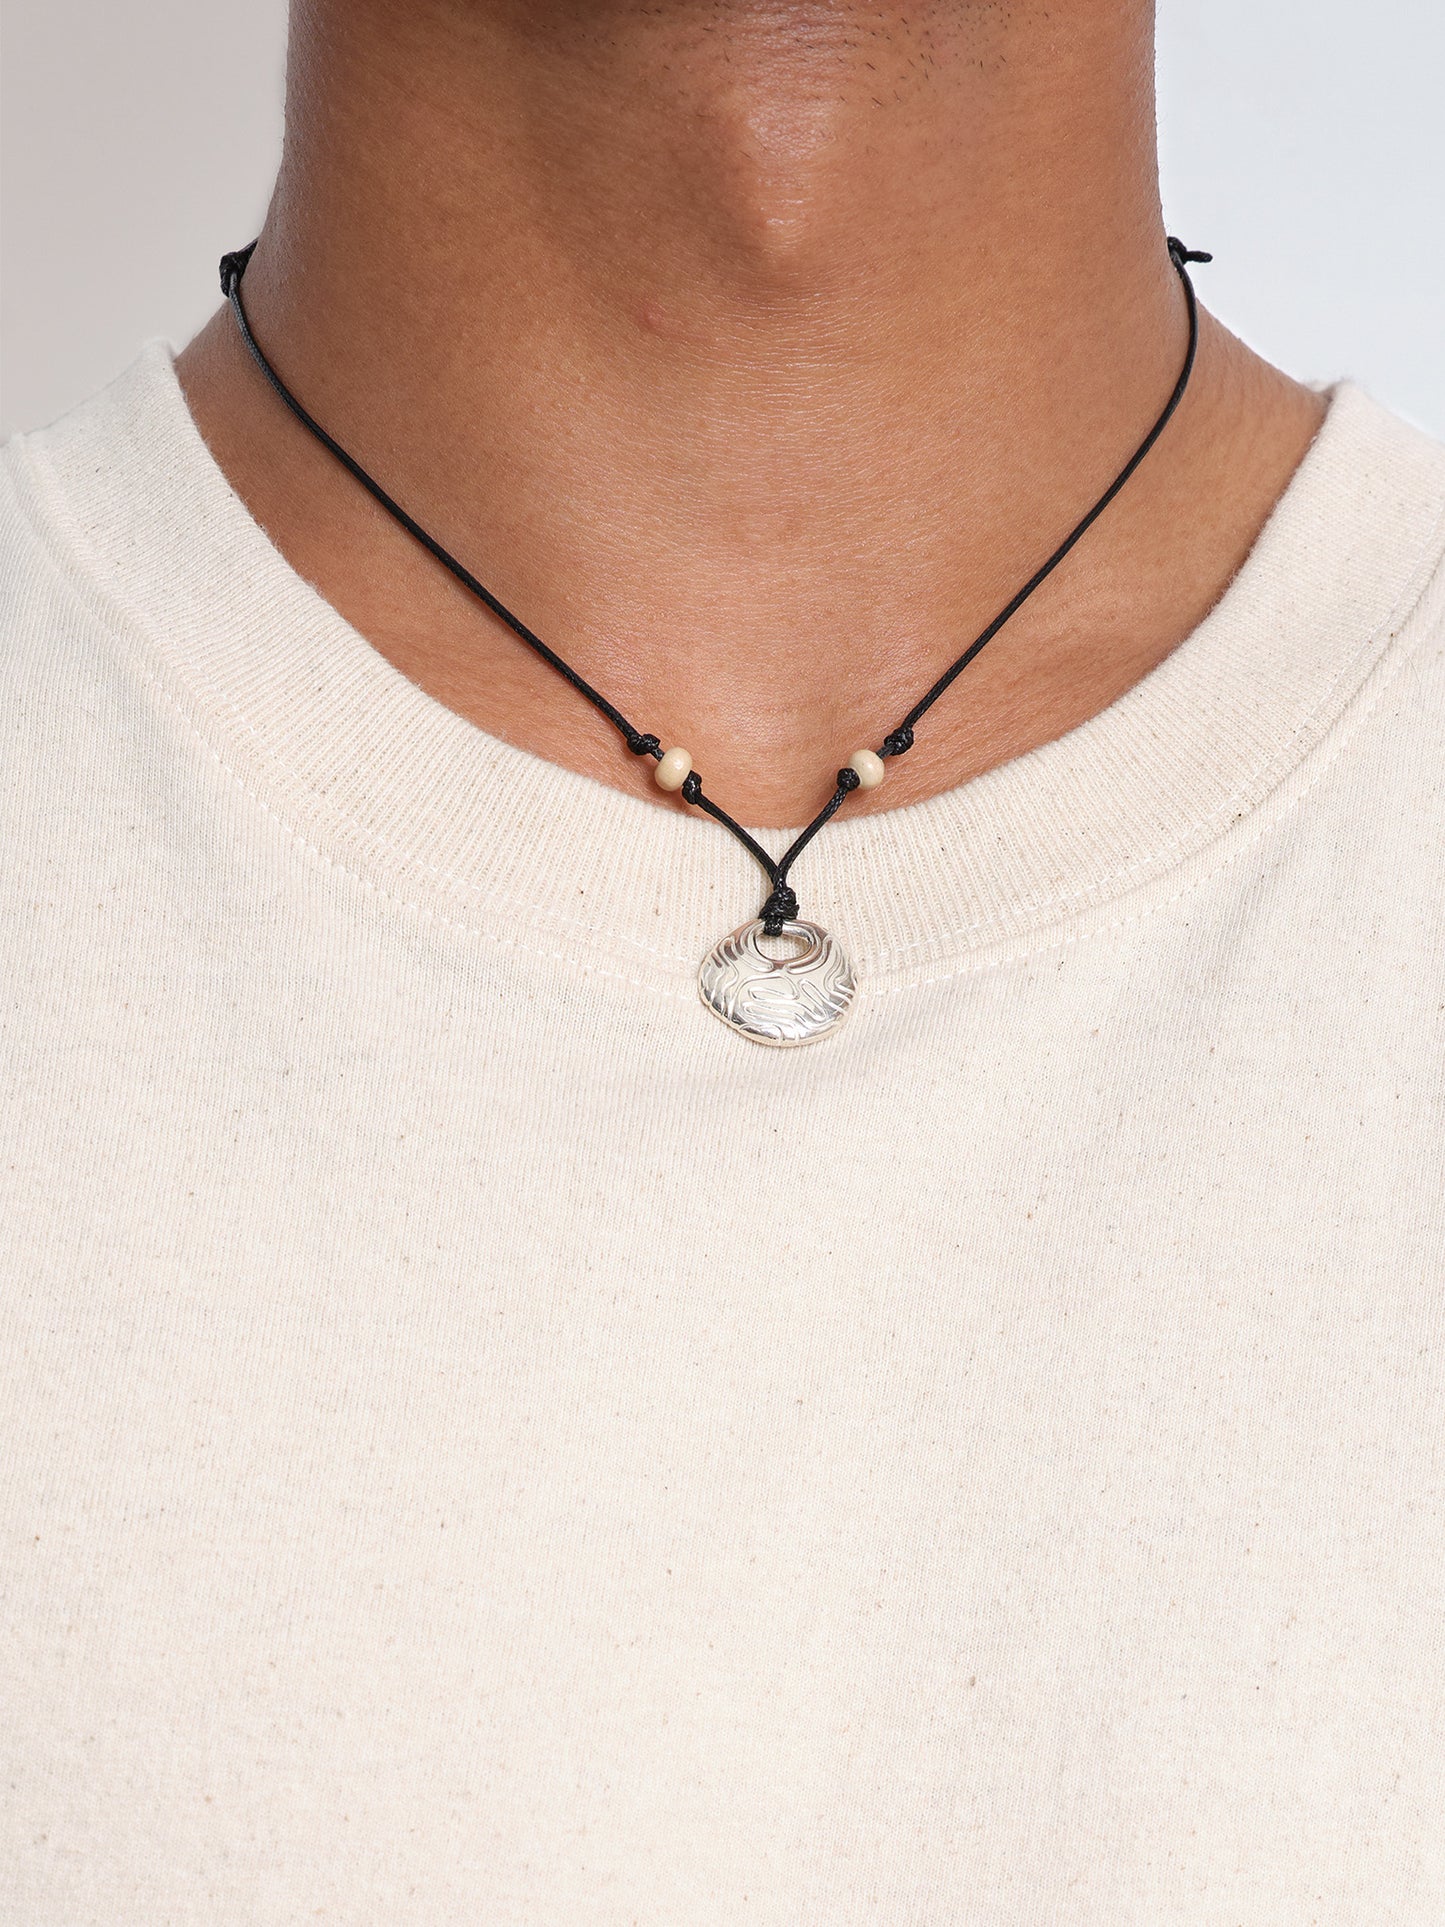 Story mfg. x octi Necklace (3)